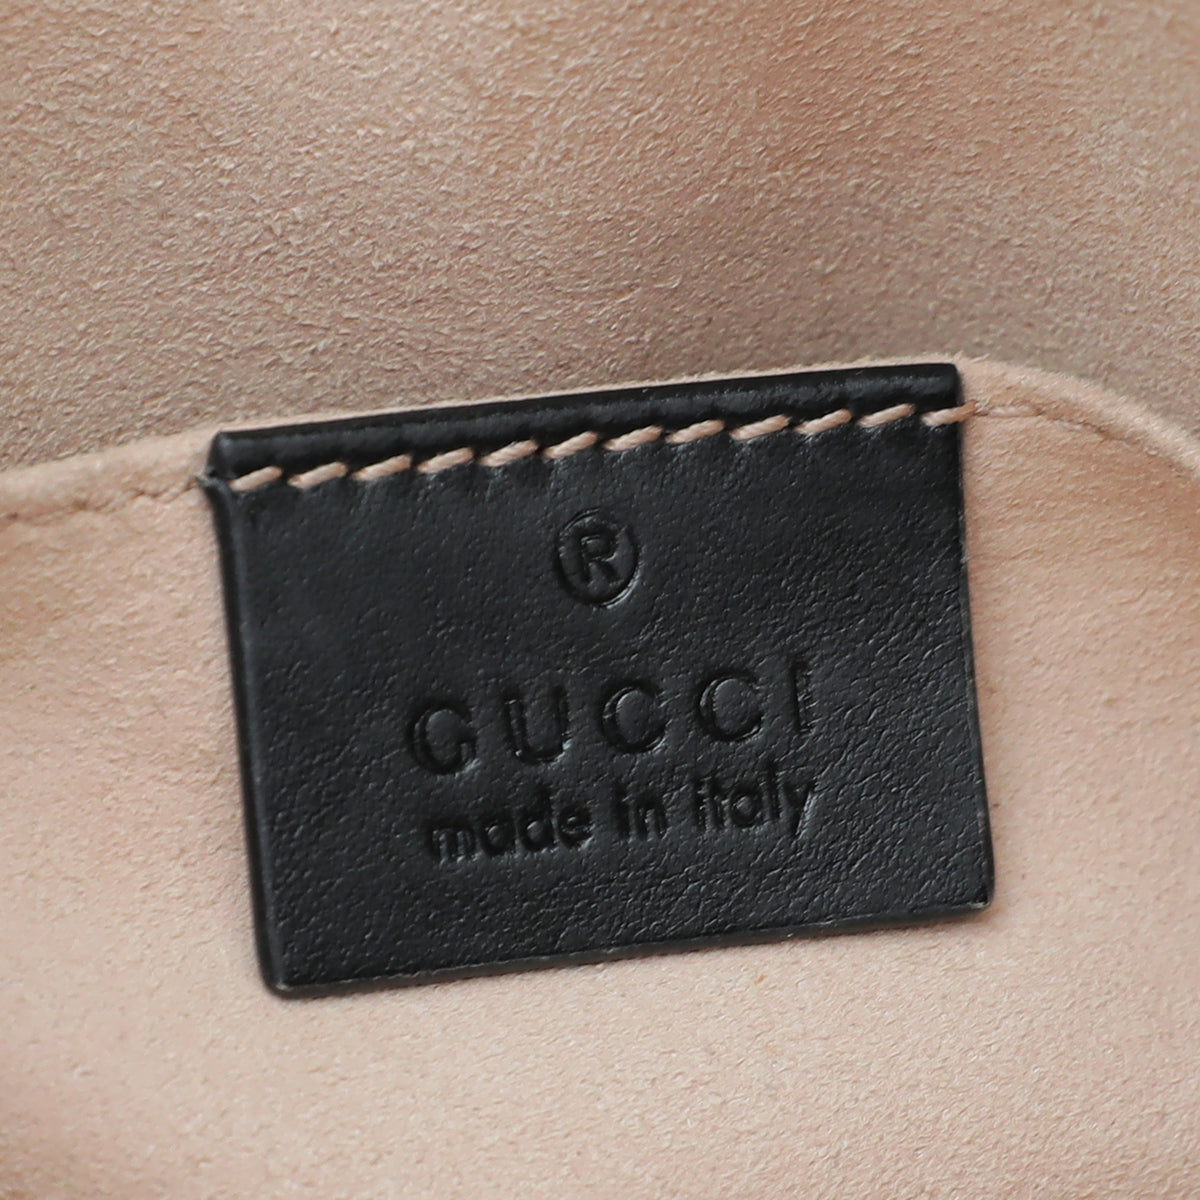 Load image into Gallery viewer, Gucci Black GG Marmont Mini Belt Bag
